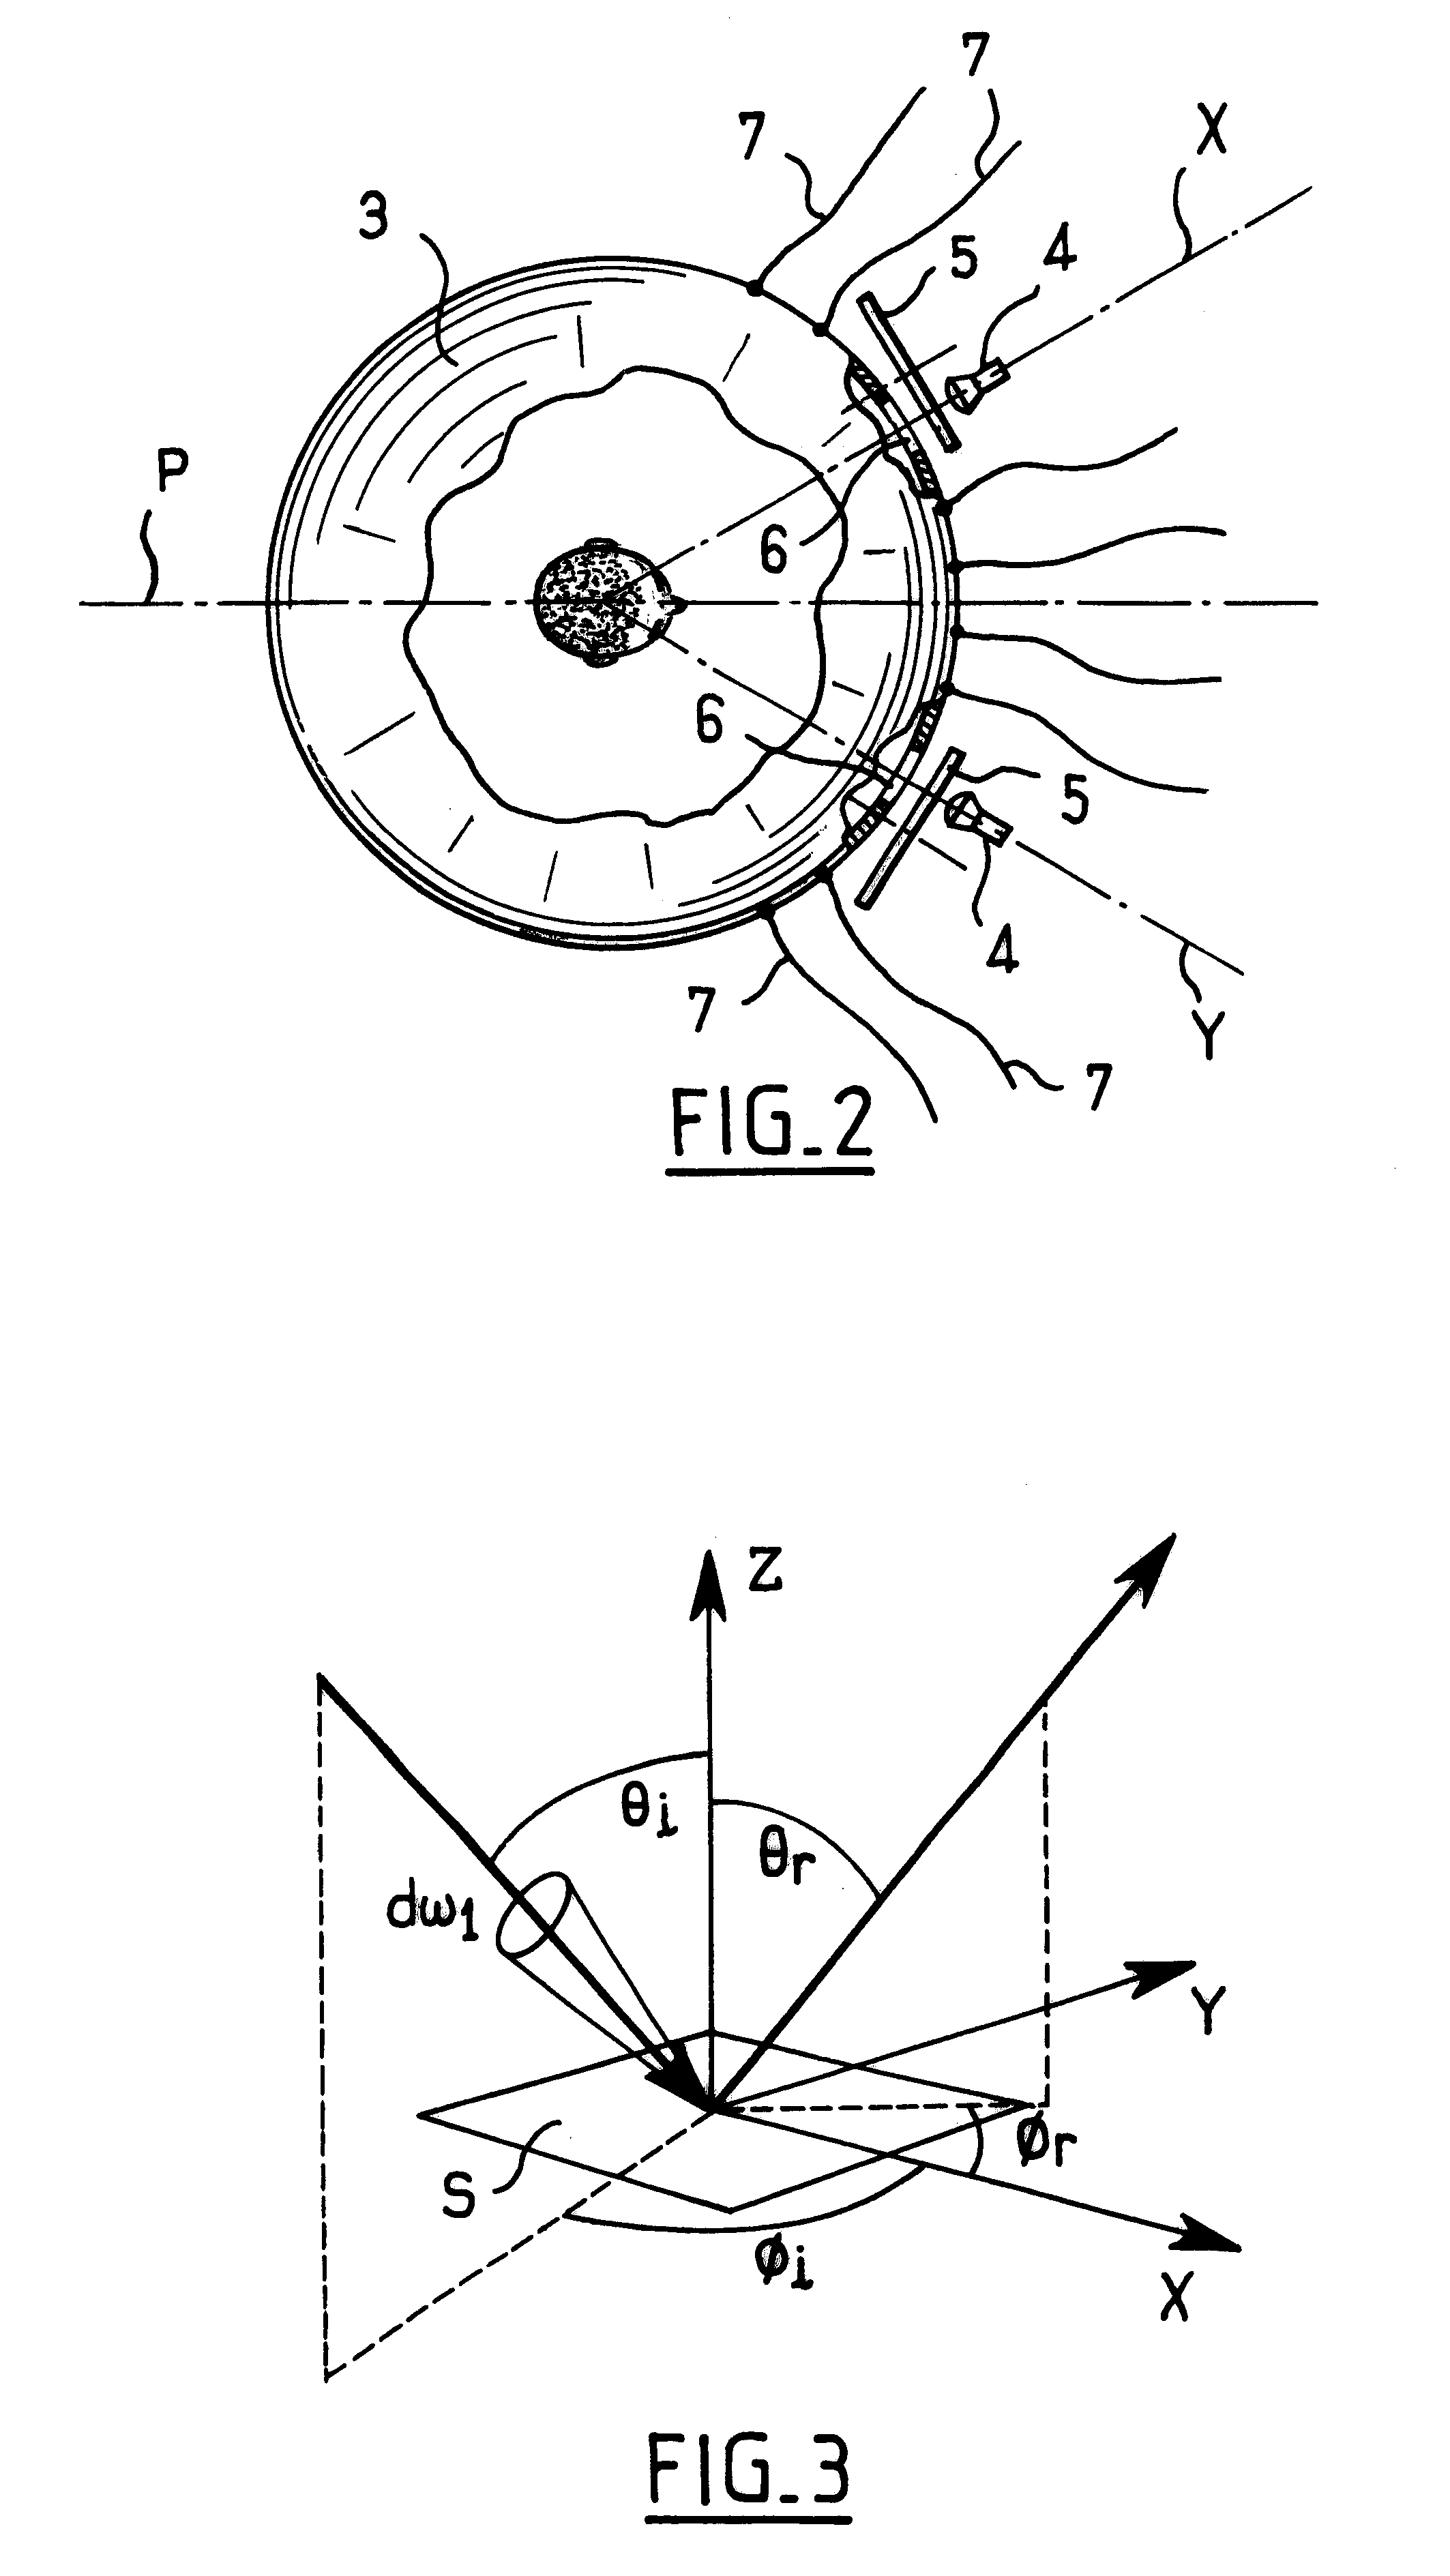 Apparatus for assisting makeup and an assembly constituted by such apparatus and apparatus for delivering makeup having a predetermined BRDF as selected by the apparatus for assisting makeup